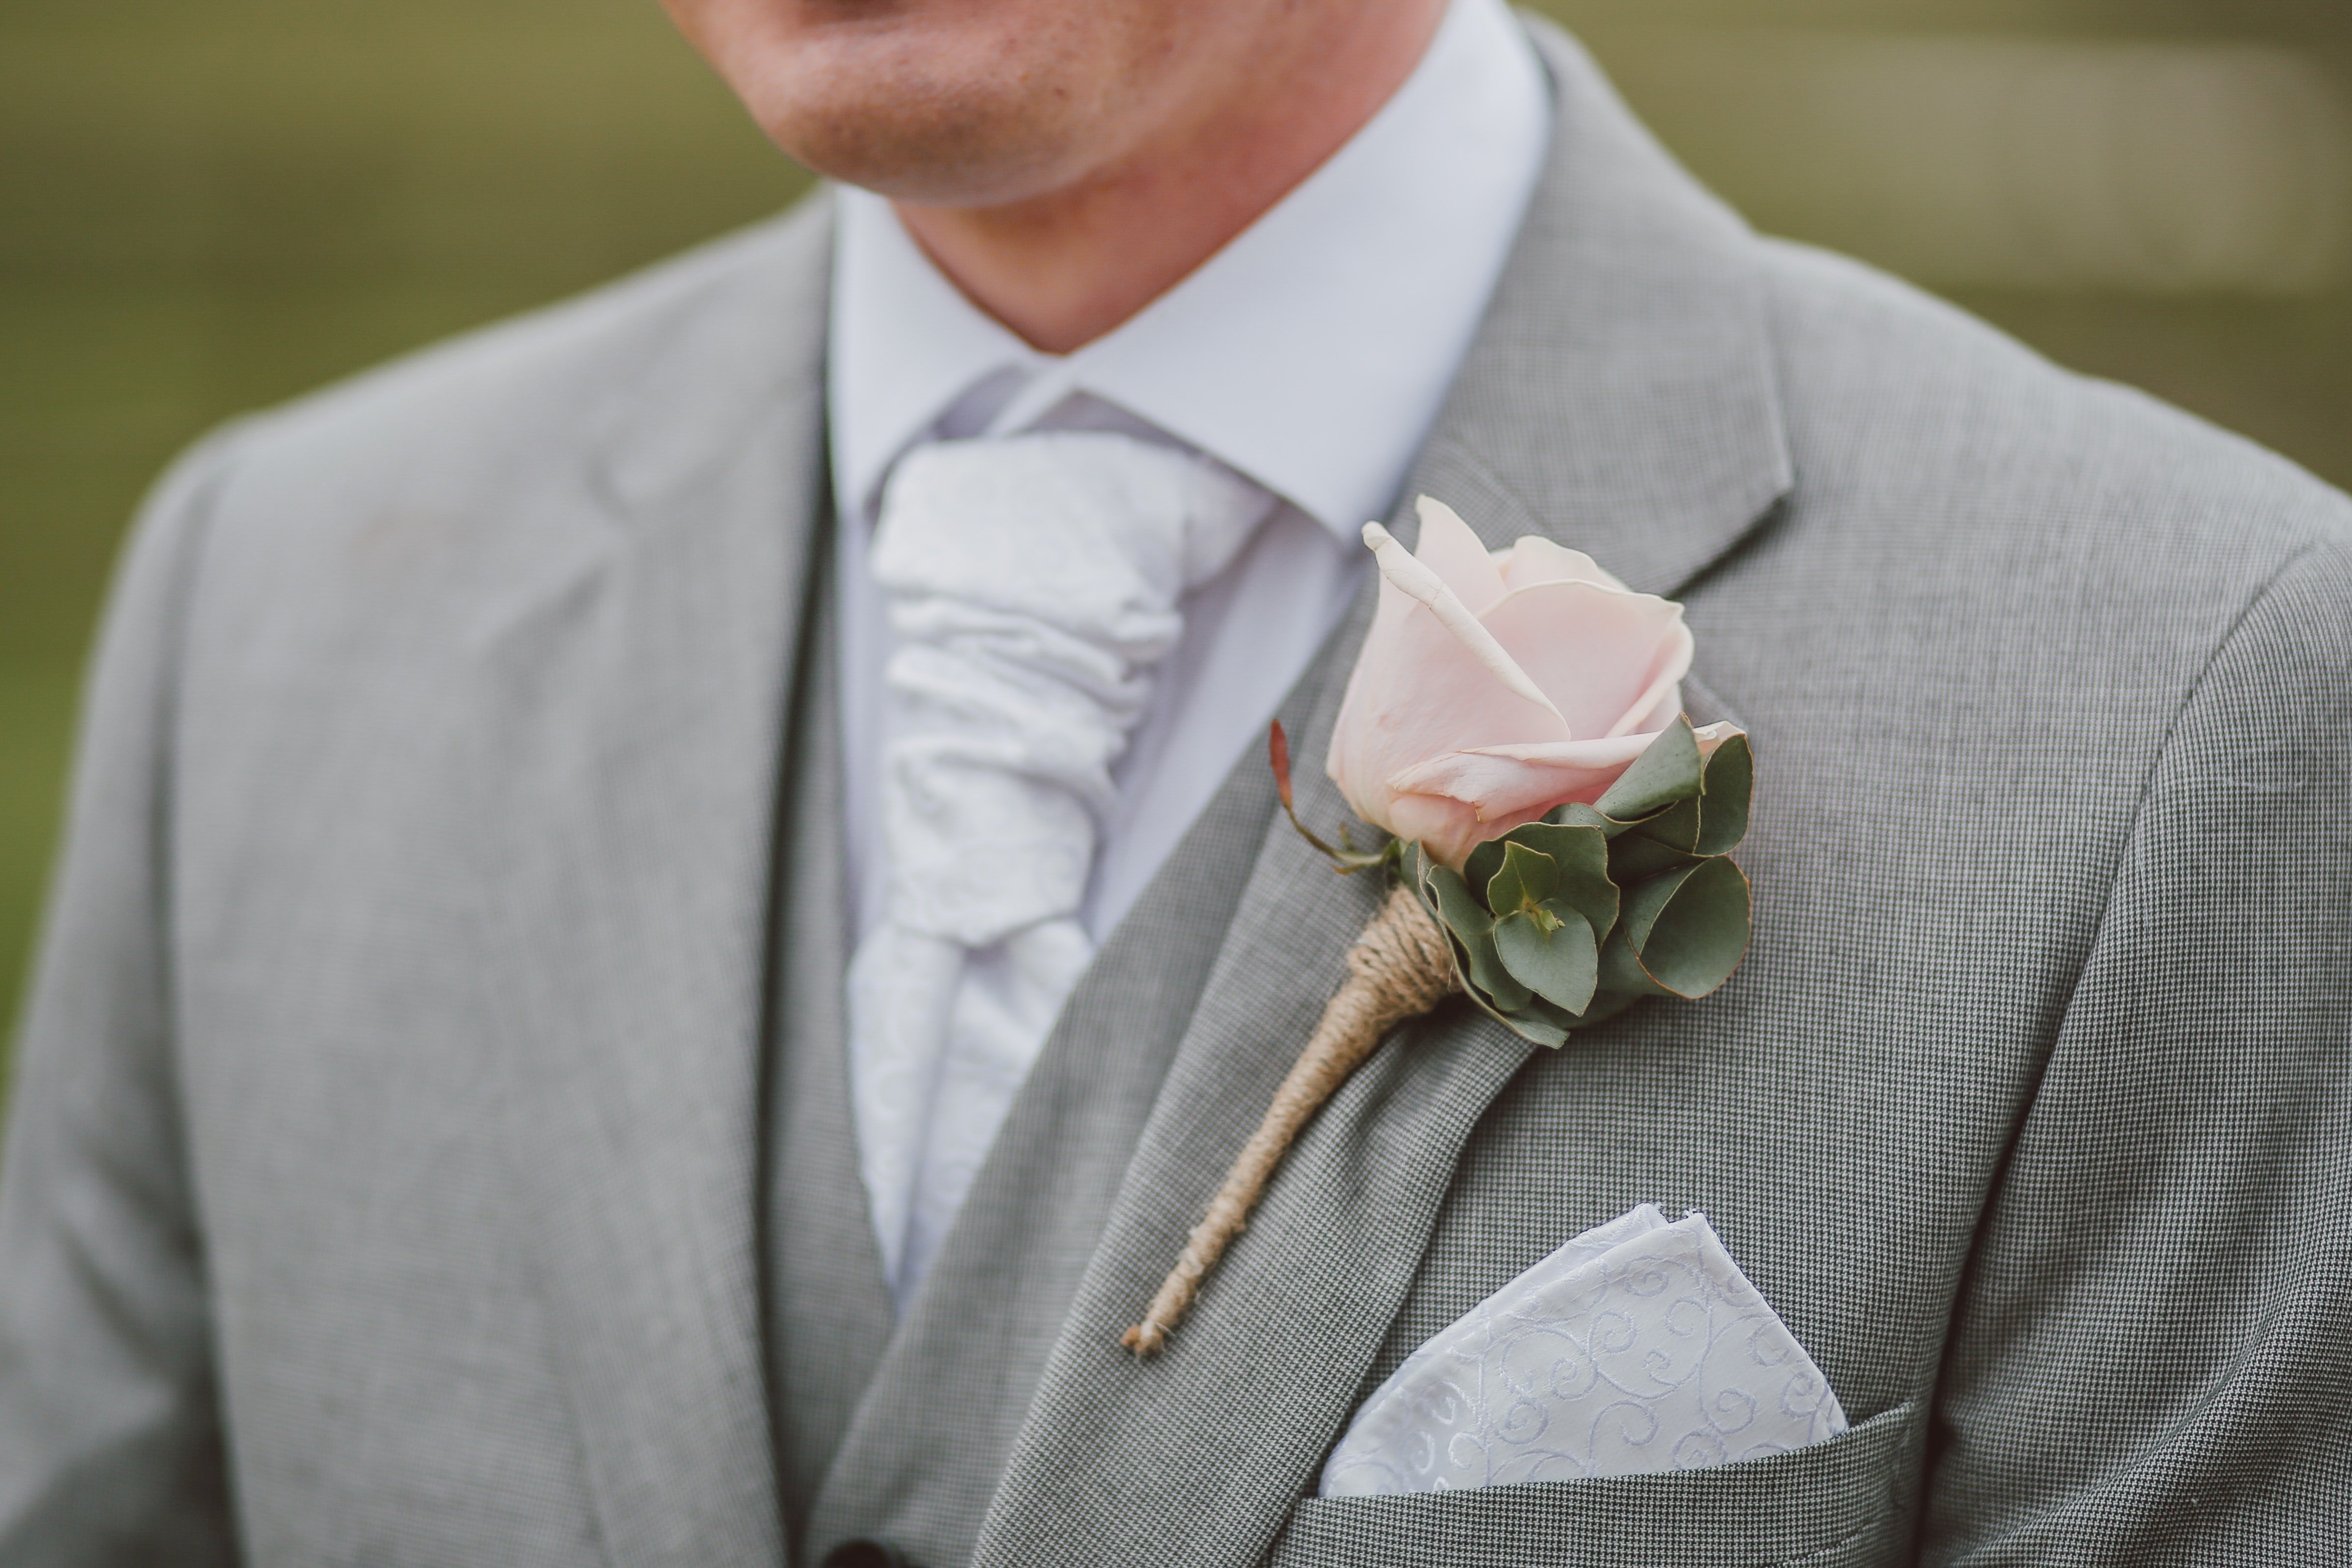 Kale discovered a letter in his suit pocket | Photo: Unsplash